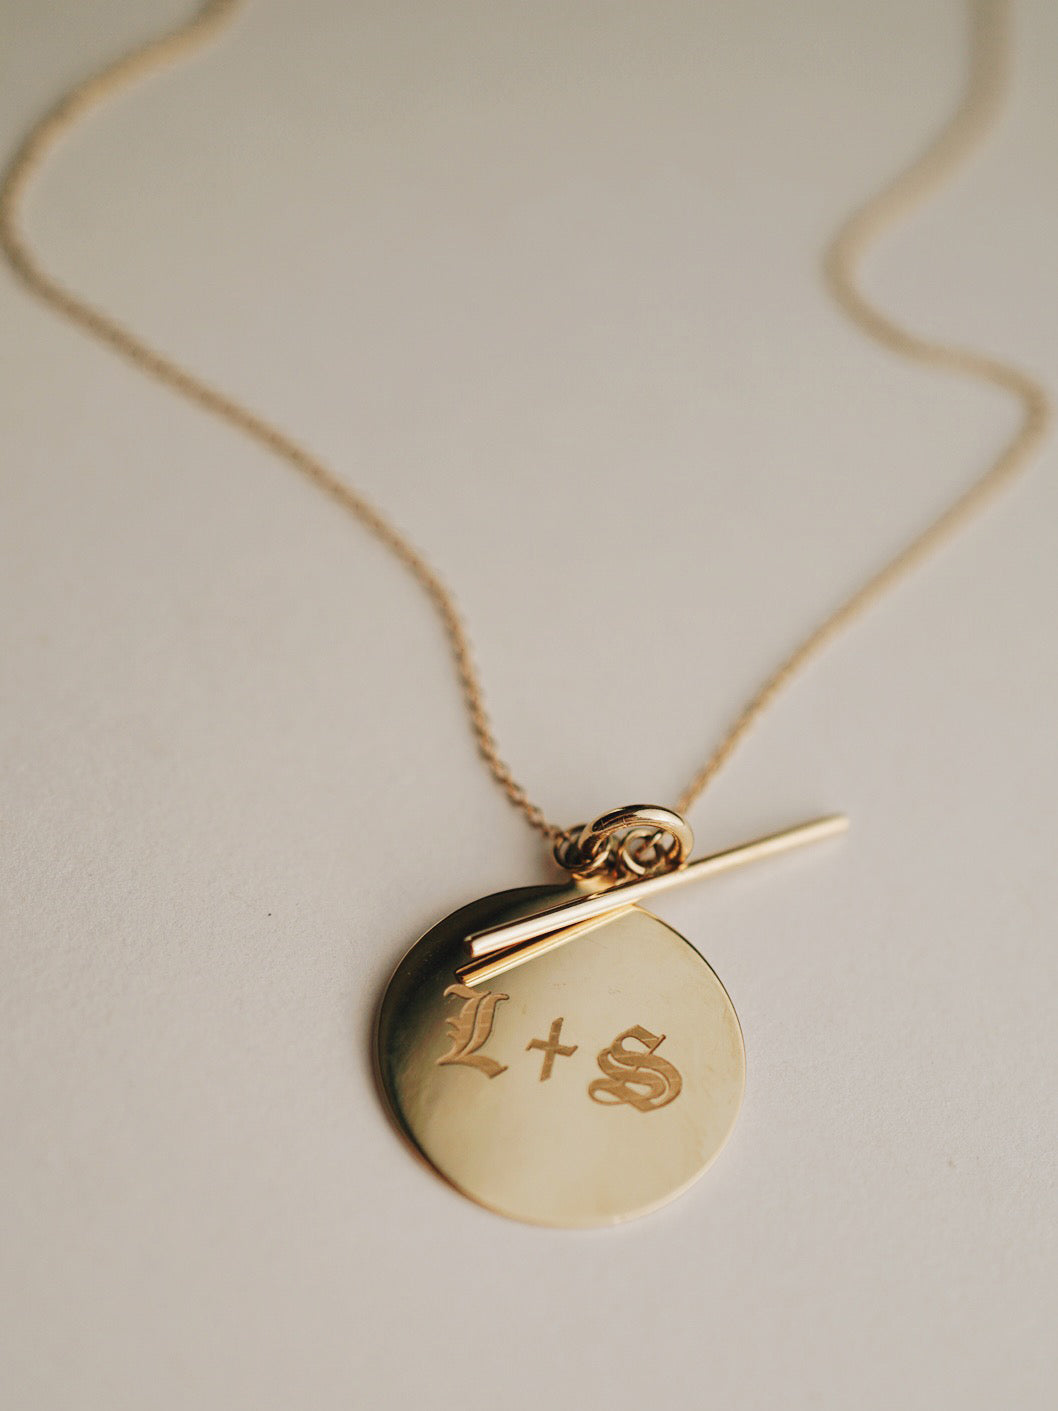 Close up of 14Kt Yellow Gold Disk and Toggle Necklace with Engraving: "L + S"